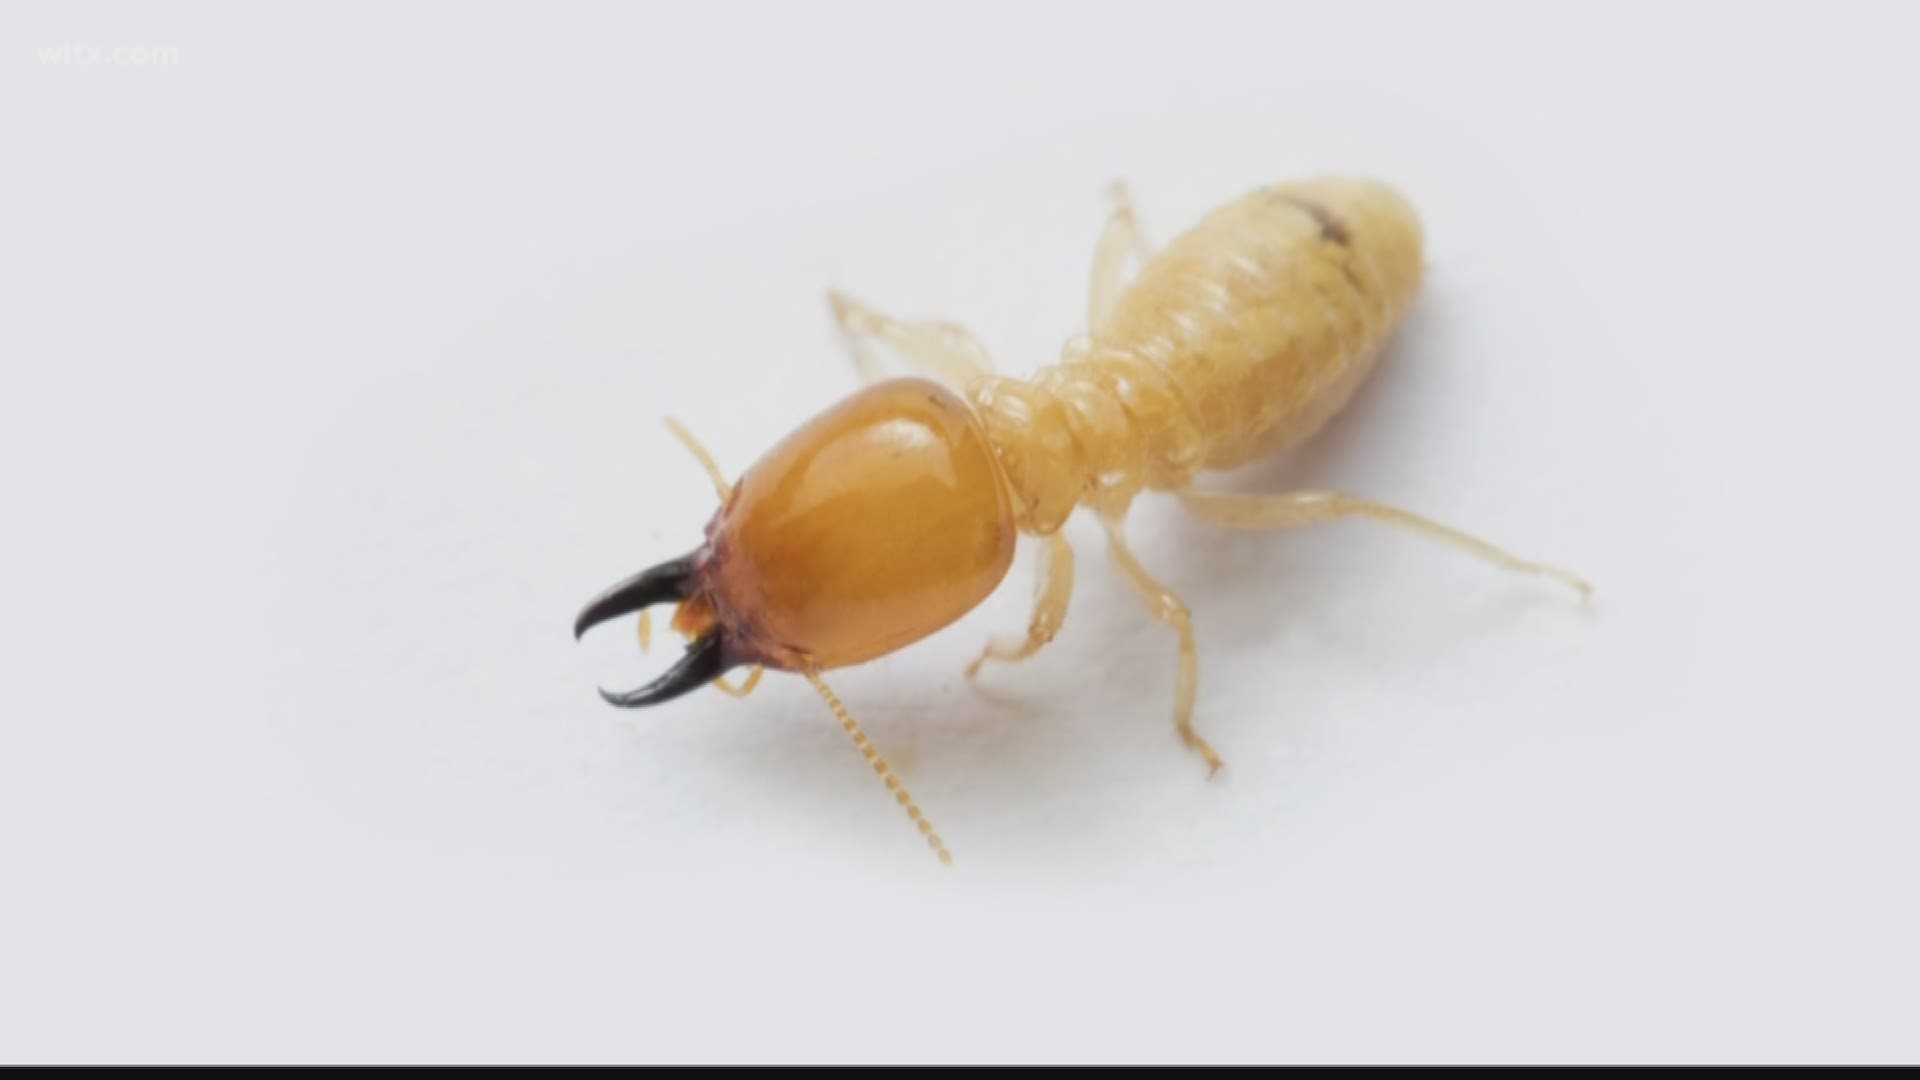 A new termite, usually found on the coast, is beginning to call the Midlands home. 